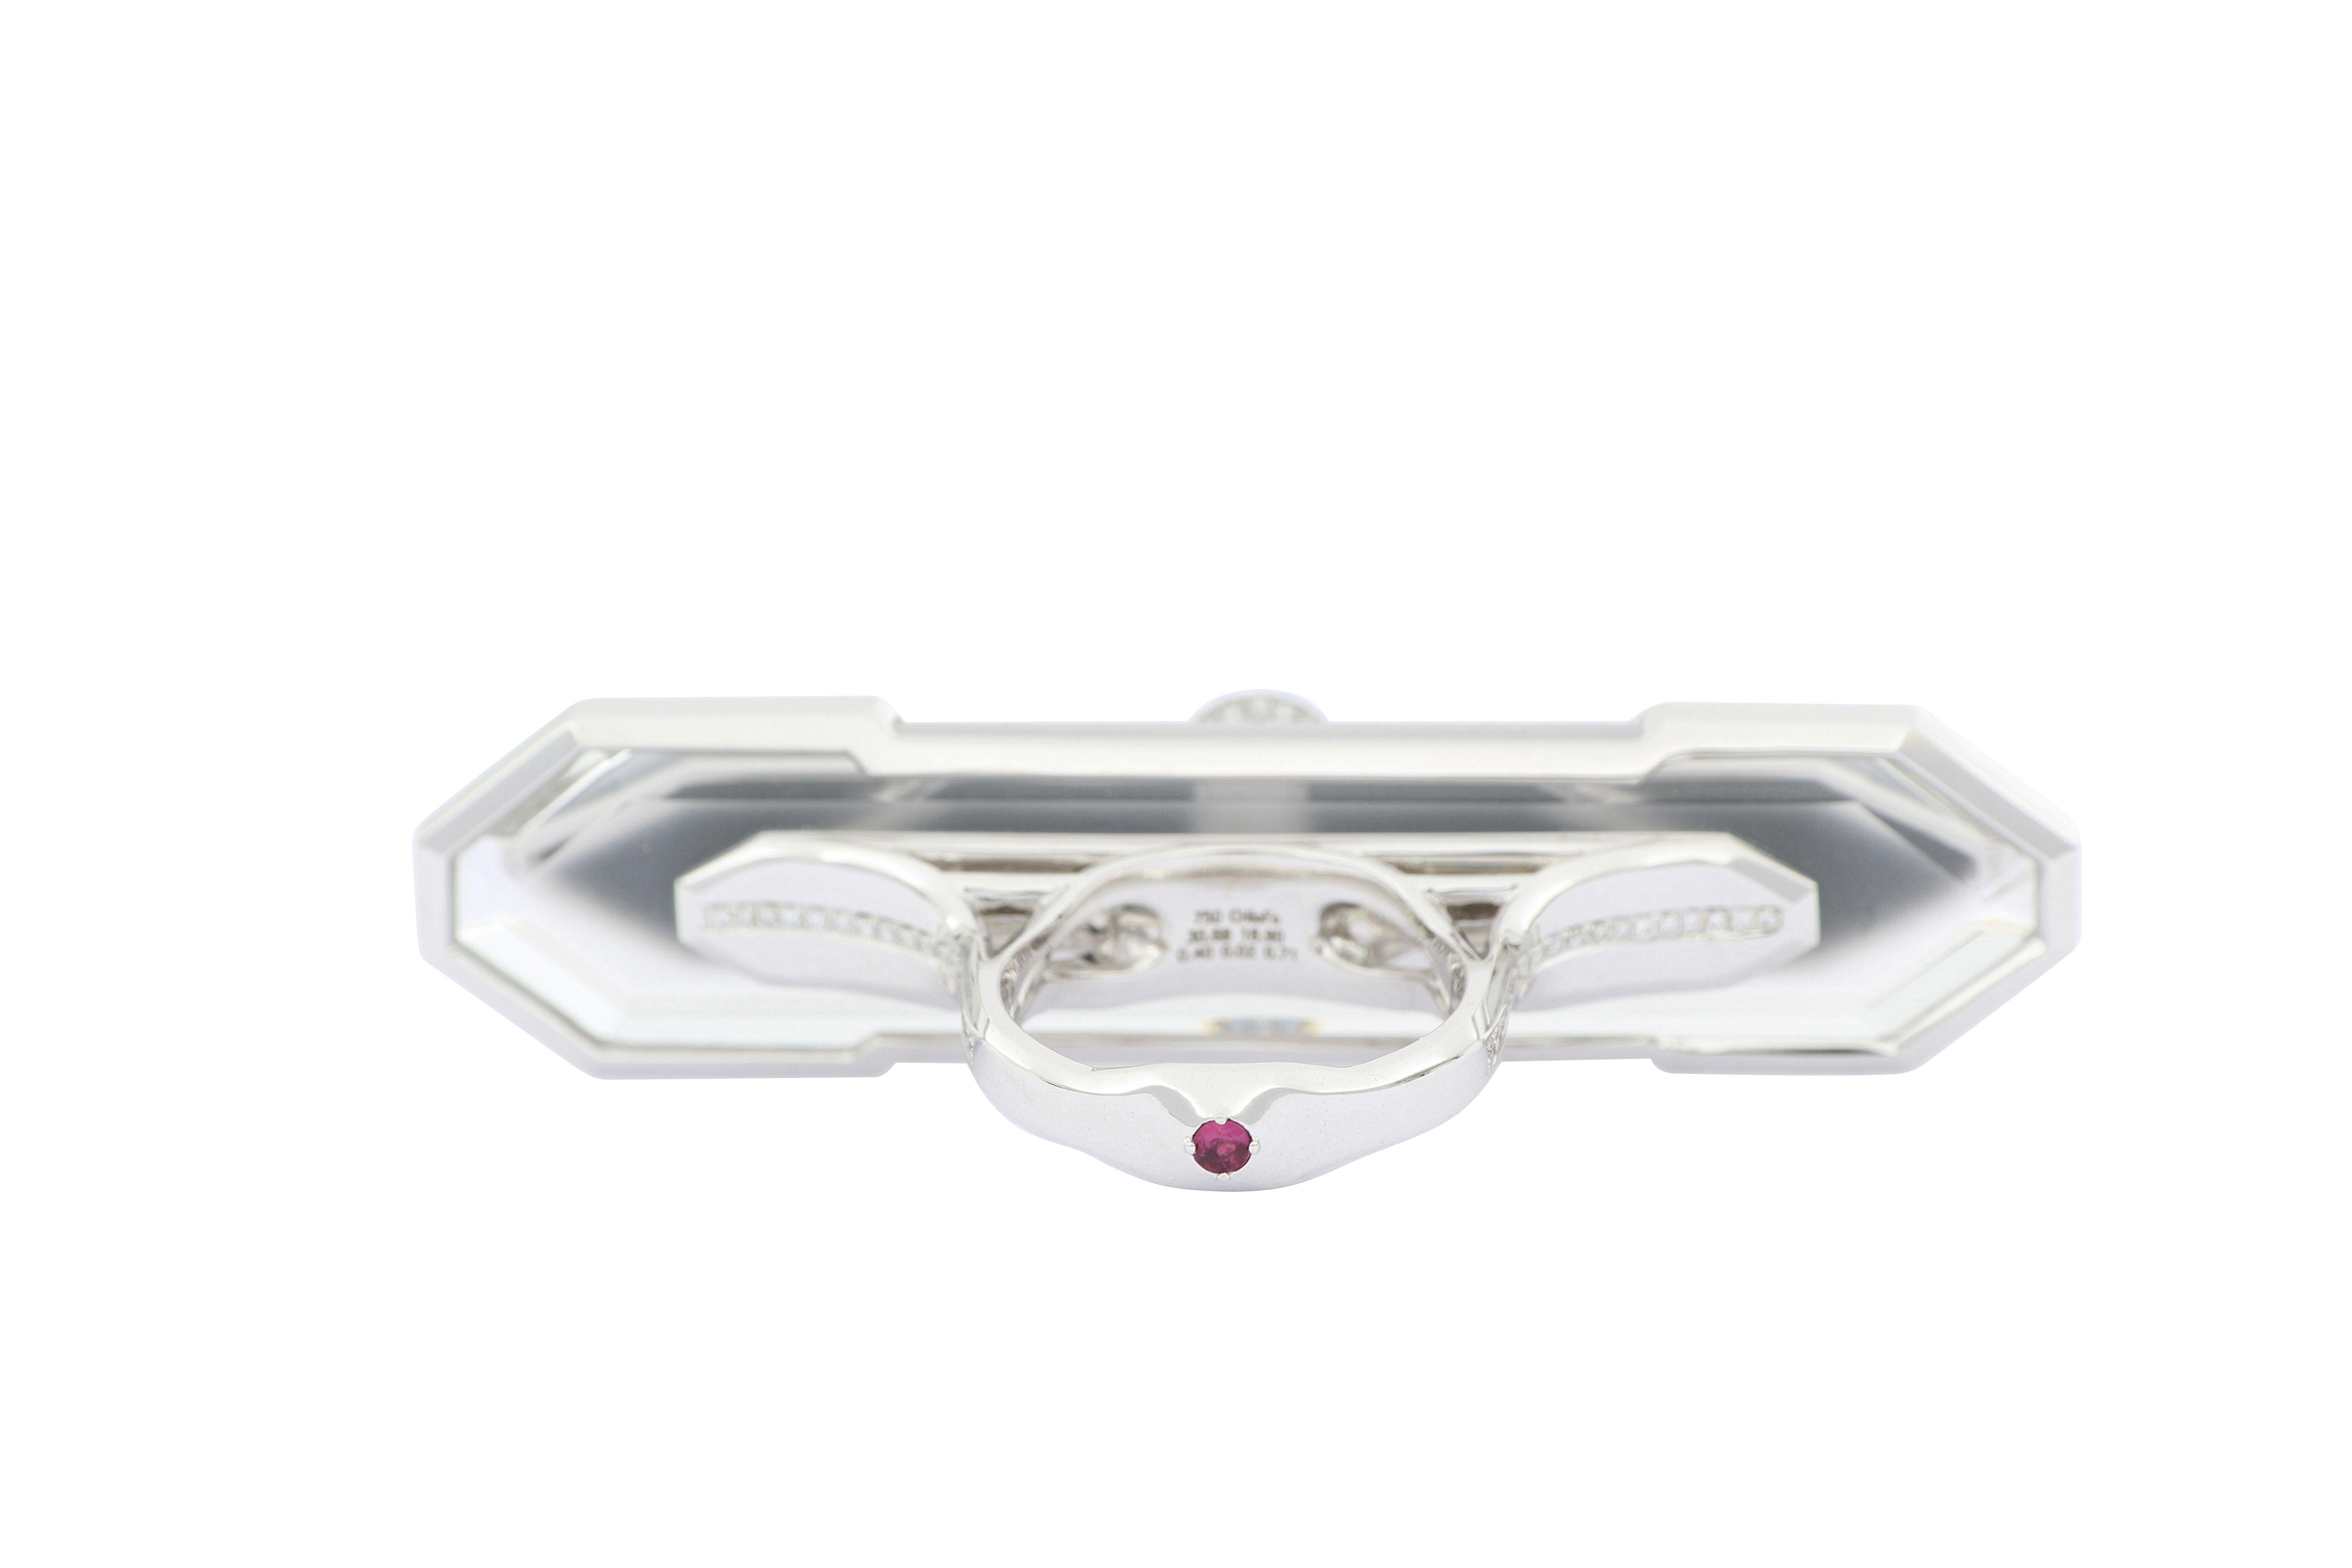 18 Karat White Gold Cocktail Ring with Ruby, Diamonds, Agate and Rock Crystal In New Condition For Sale In Macau, MO